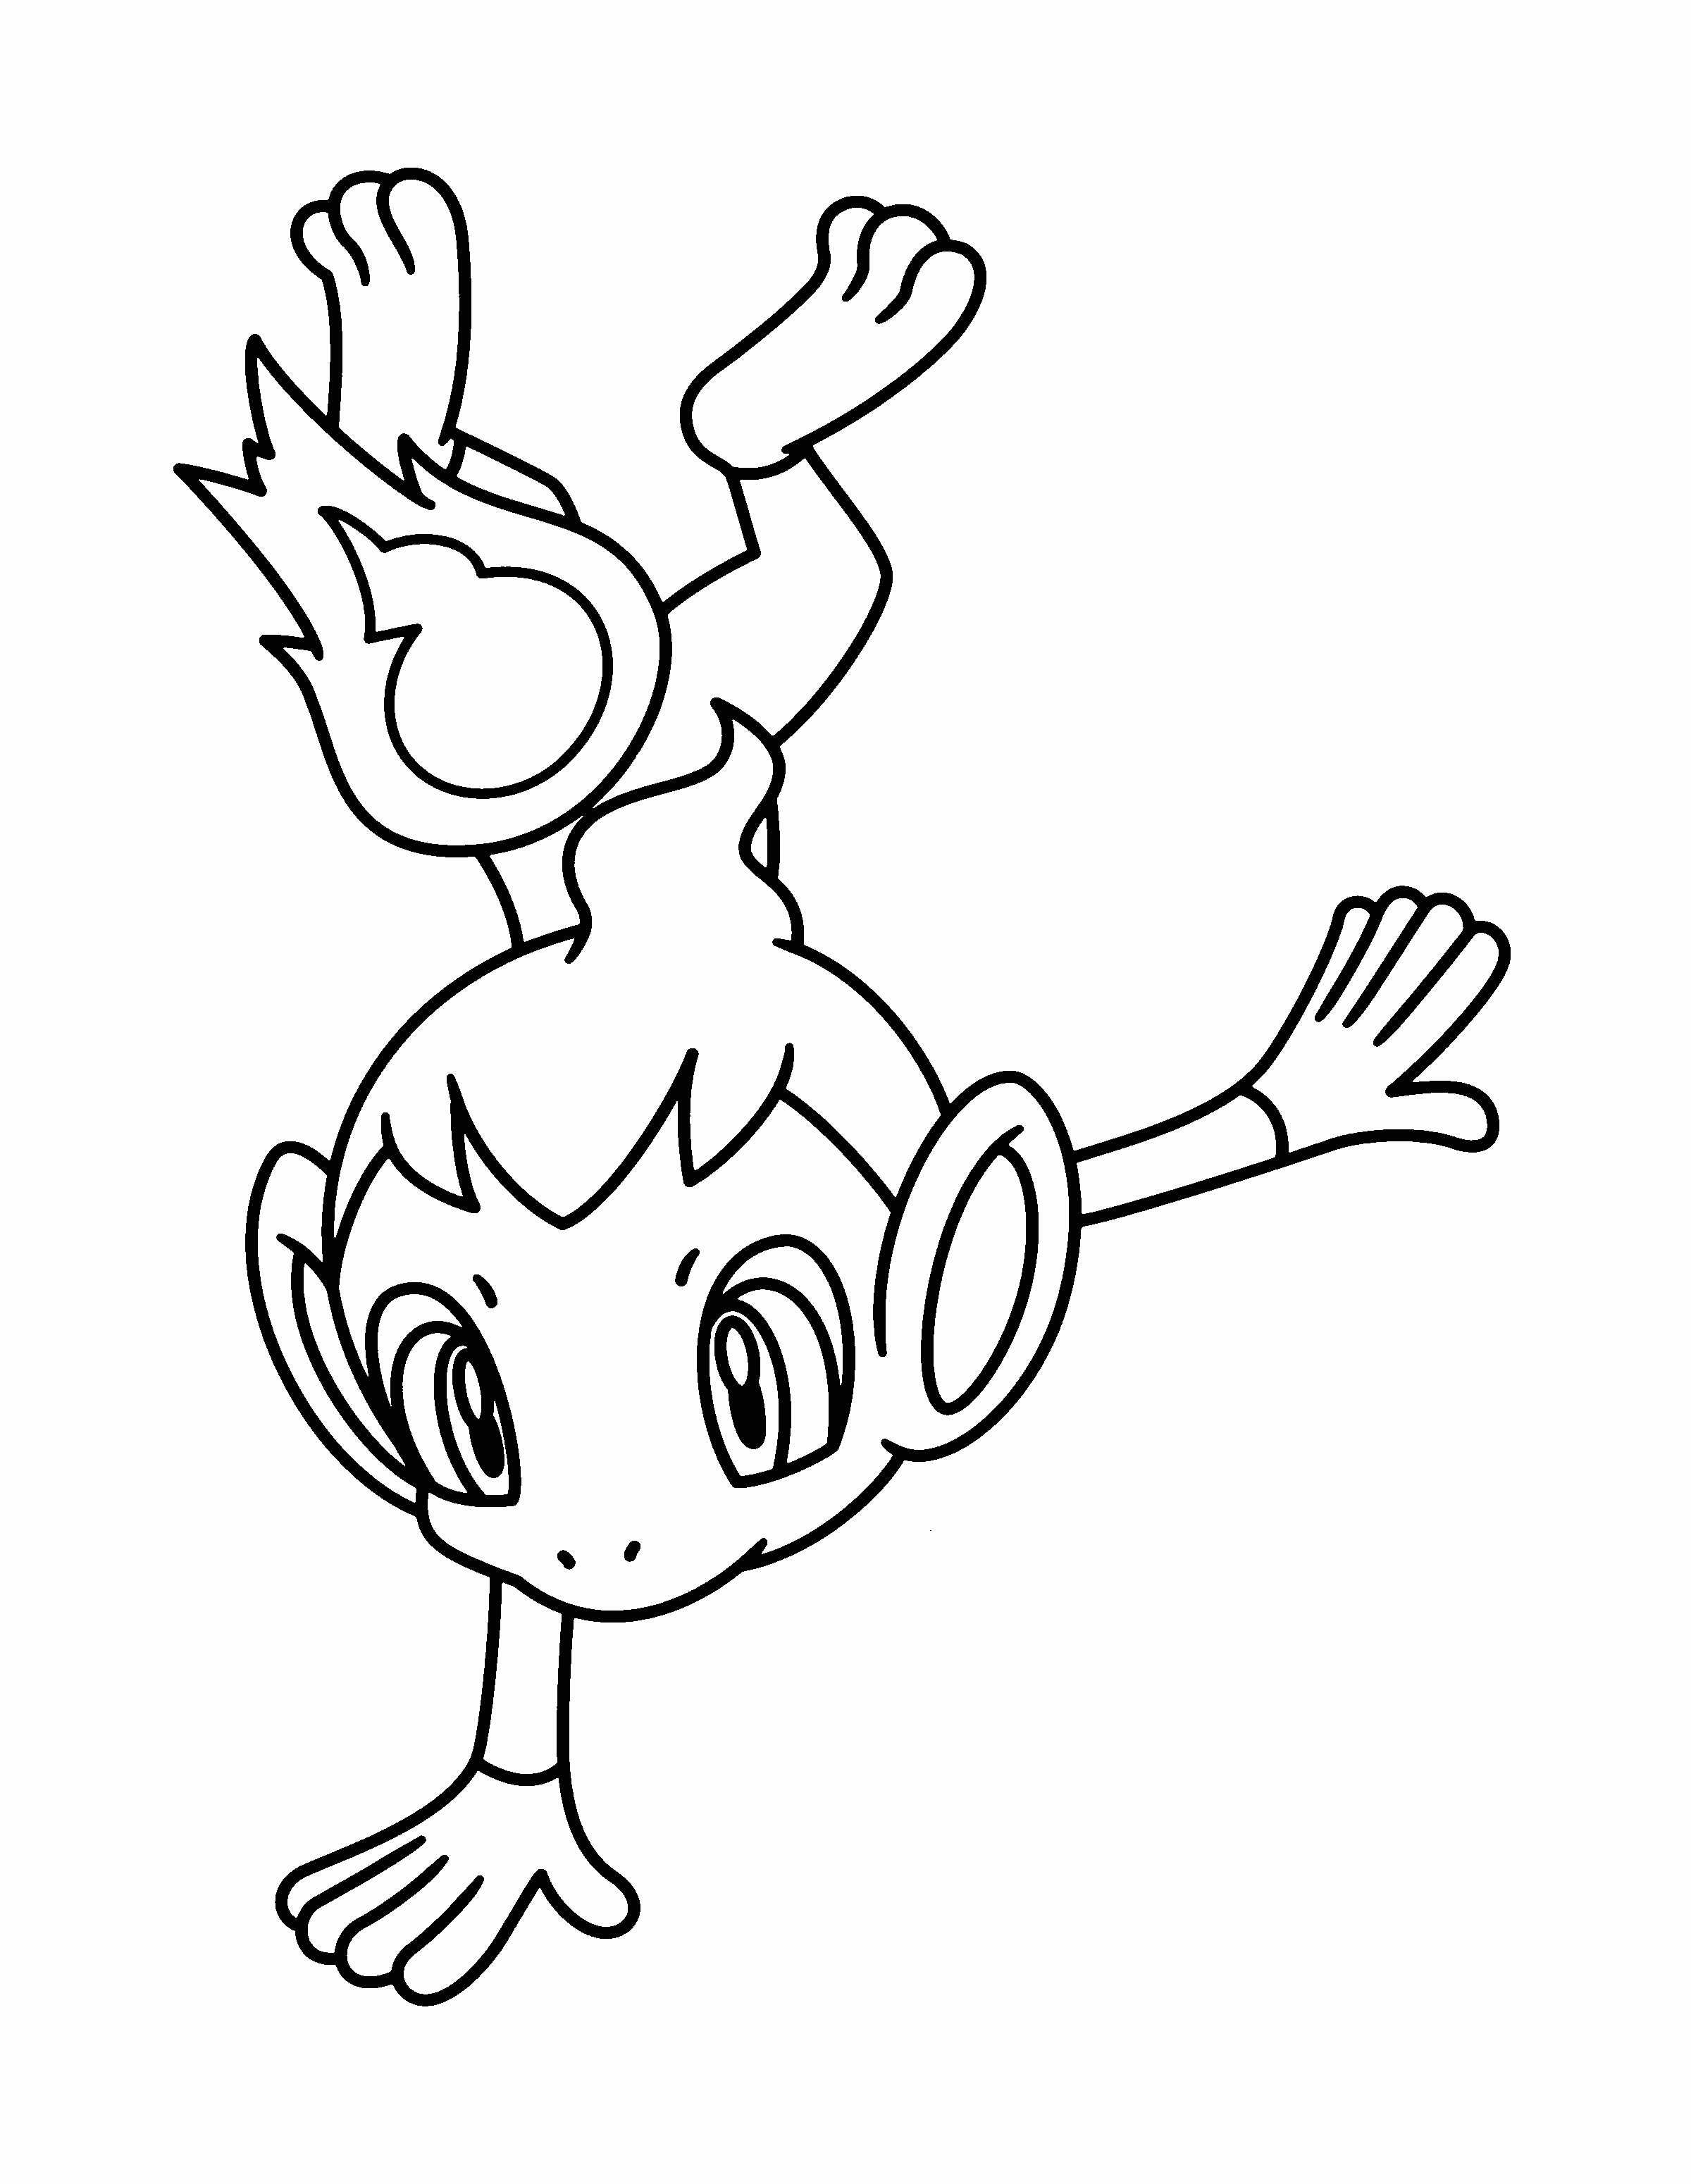 Pokemon Chimchar Coloring Pages 